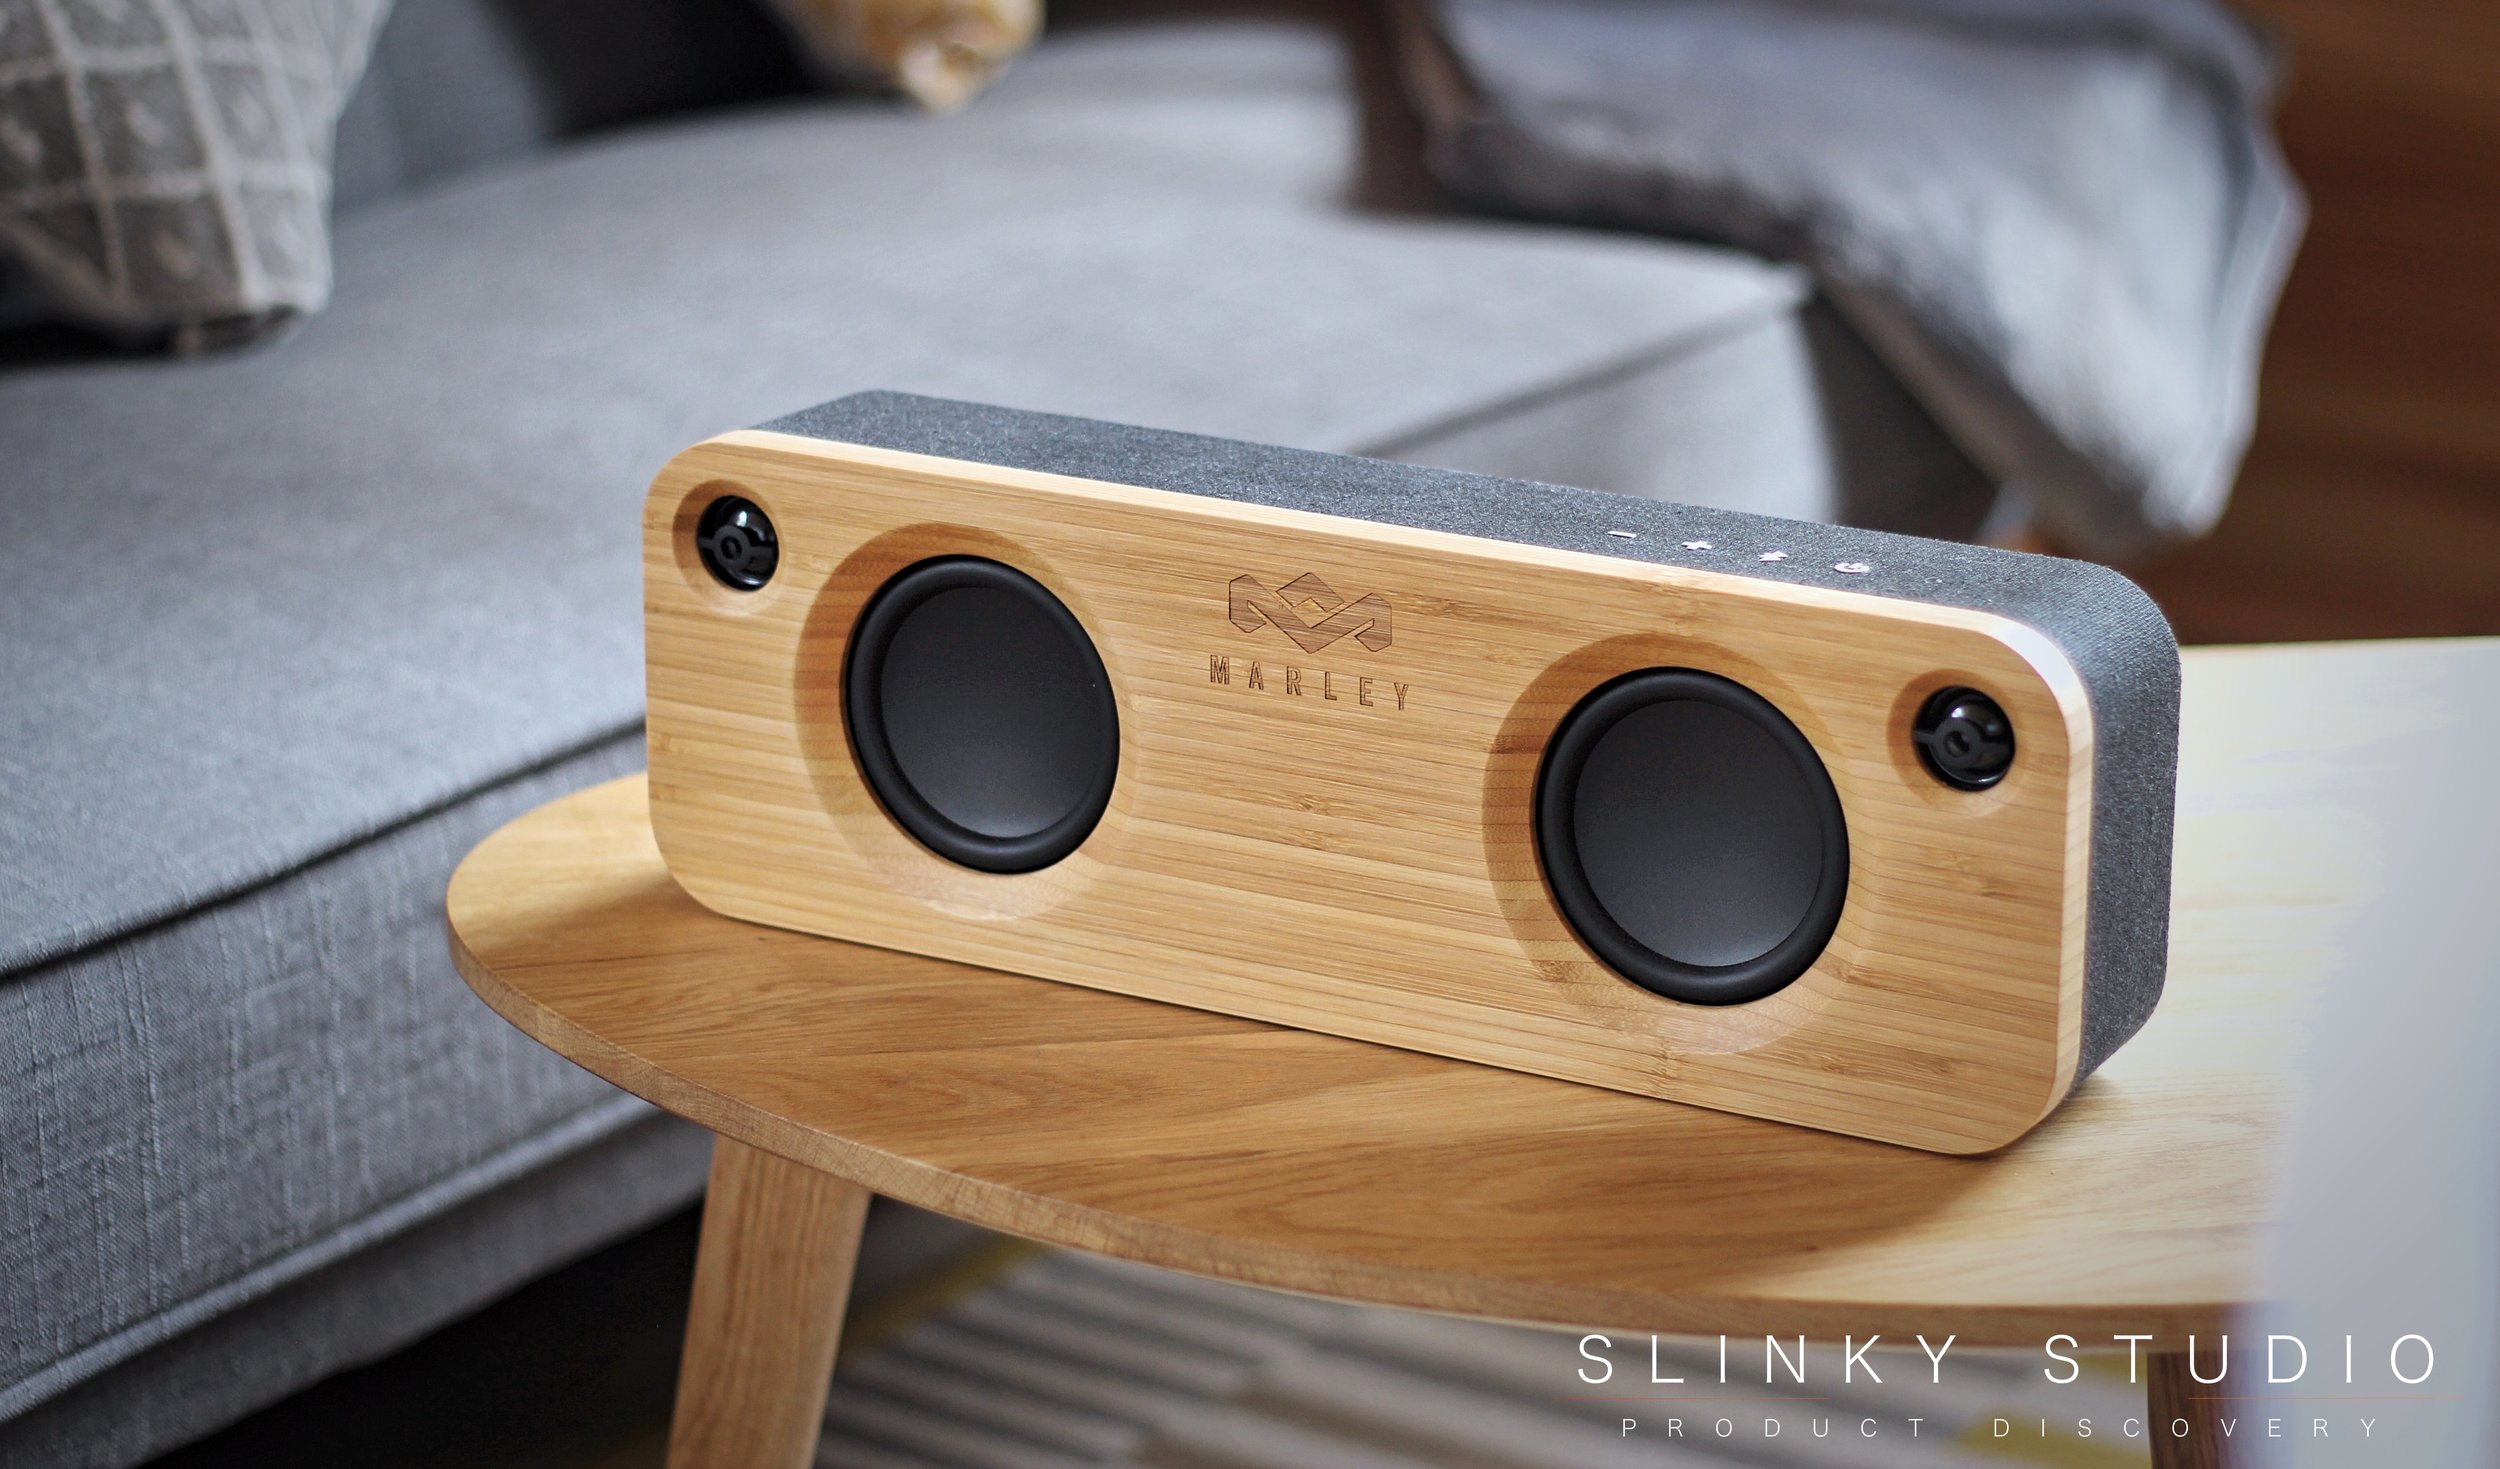 House of Marley Get Together Speaker Review: Soulful sound